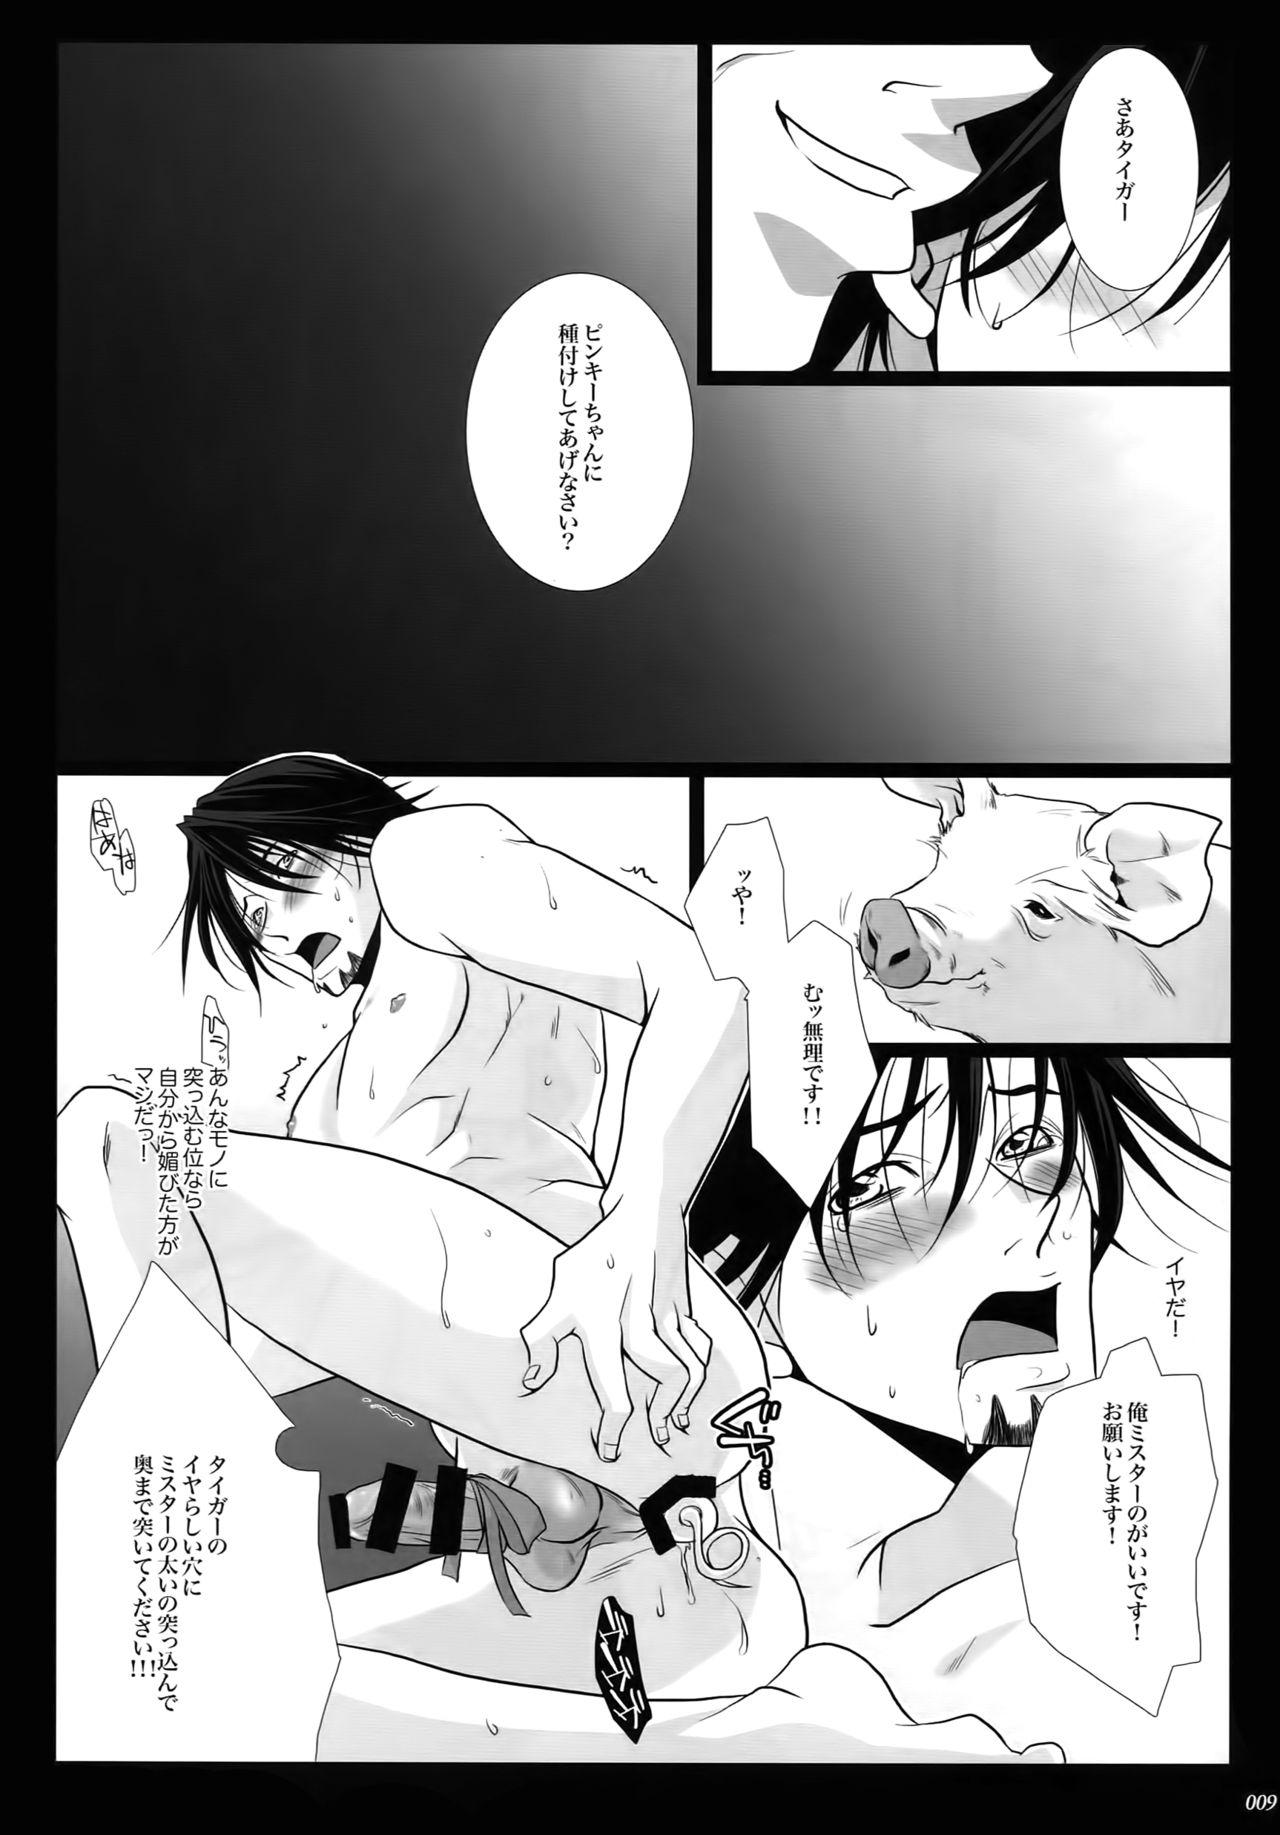 Ghetto mob;Re - Tiger and bunny Sex Tape - Page 8